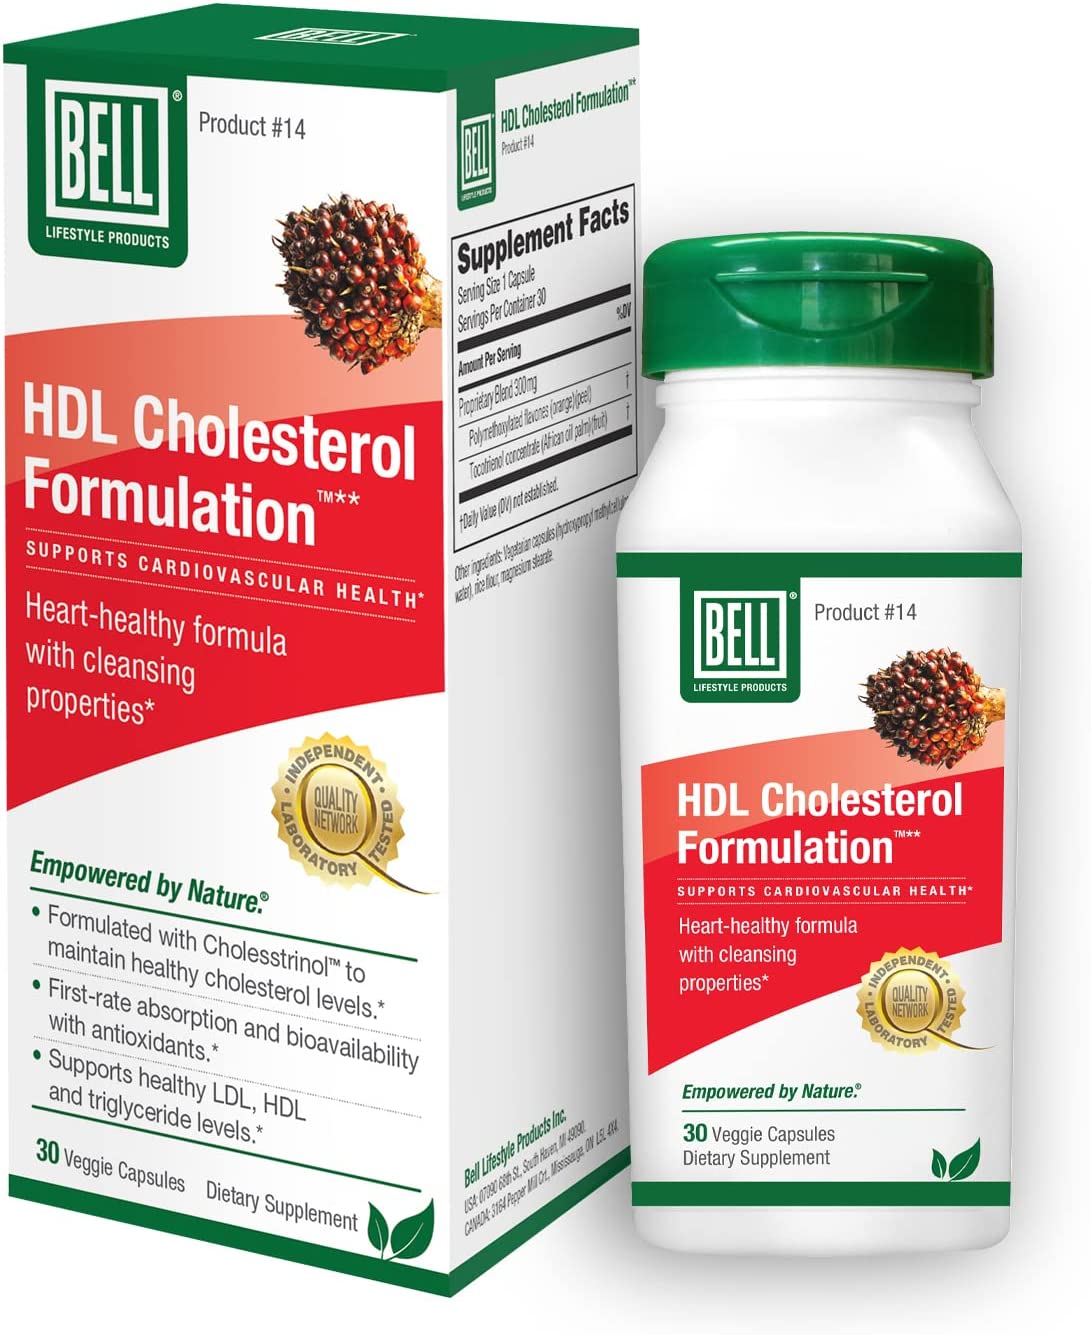 Bell HDL Cholesterol Formulation - Proprietary Blend, for Women and Men